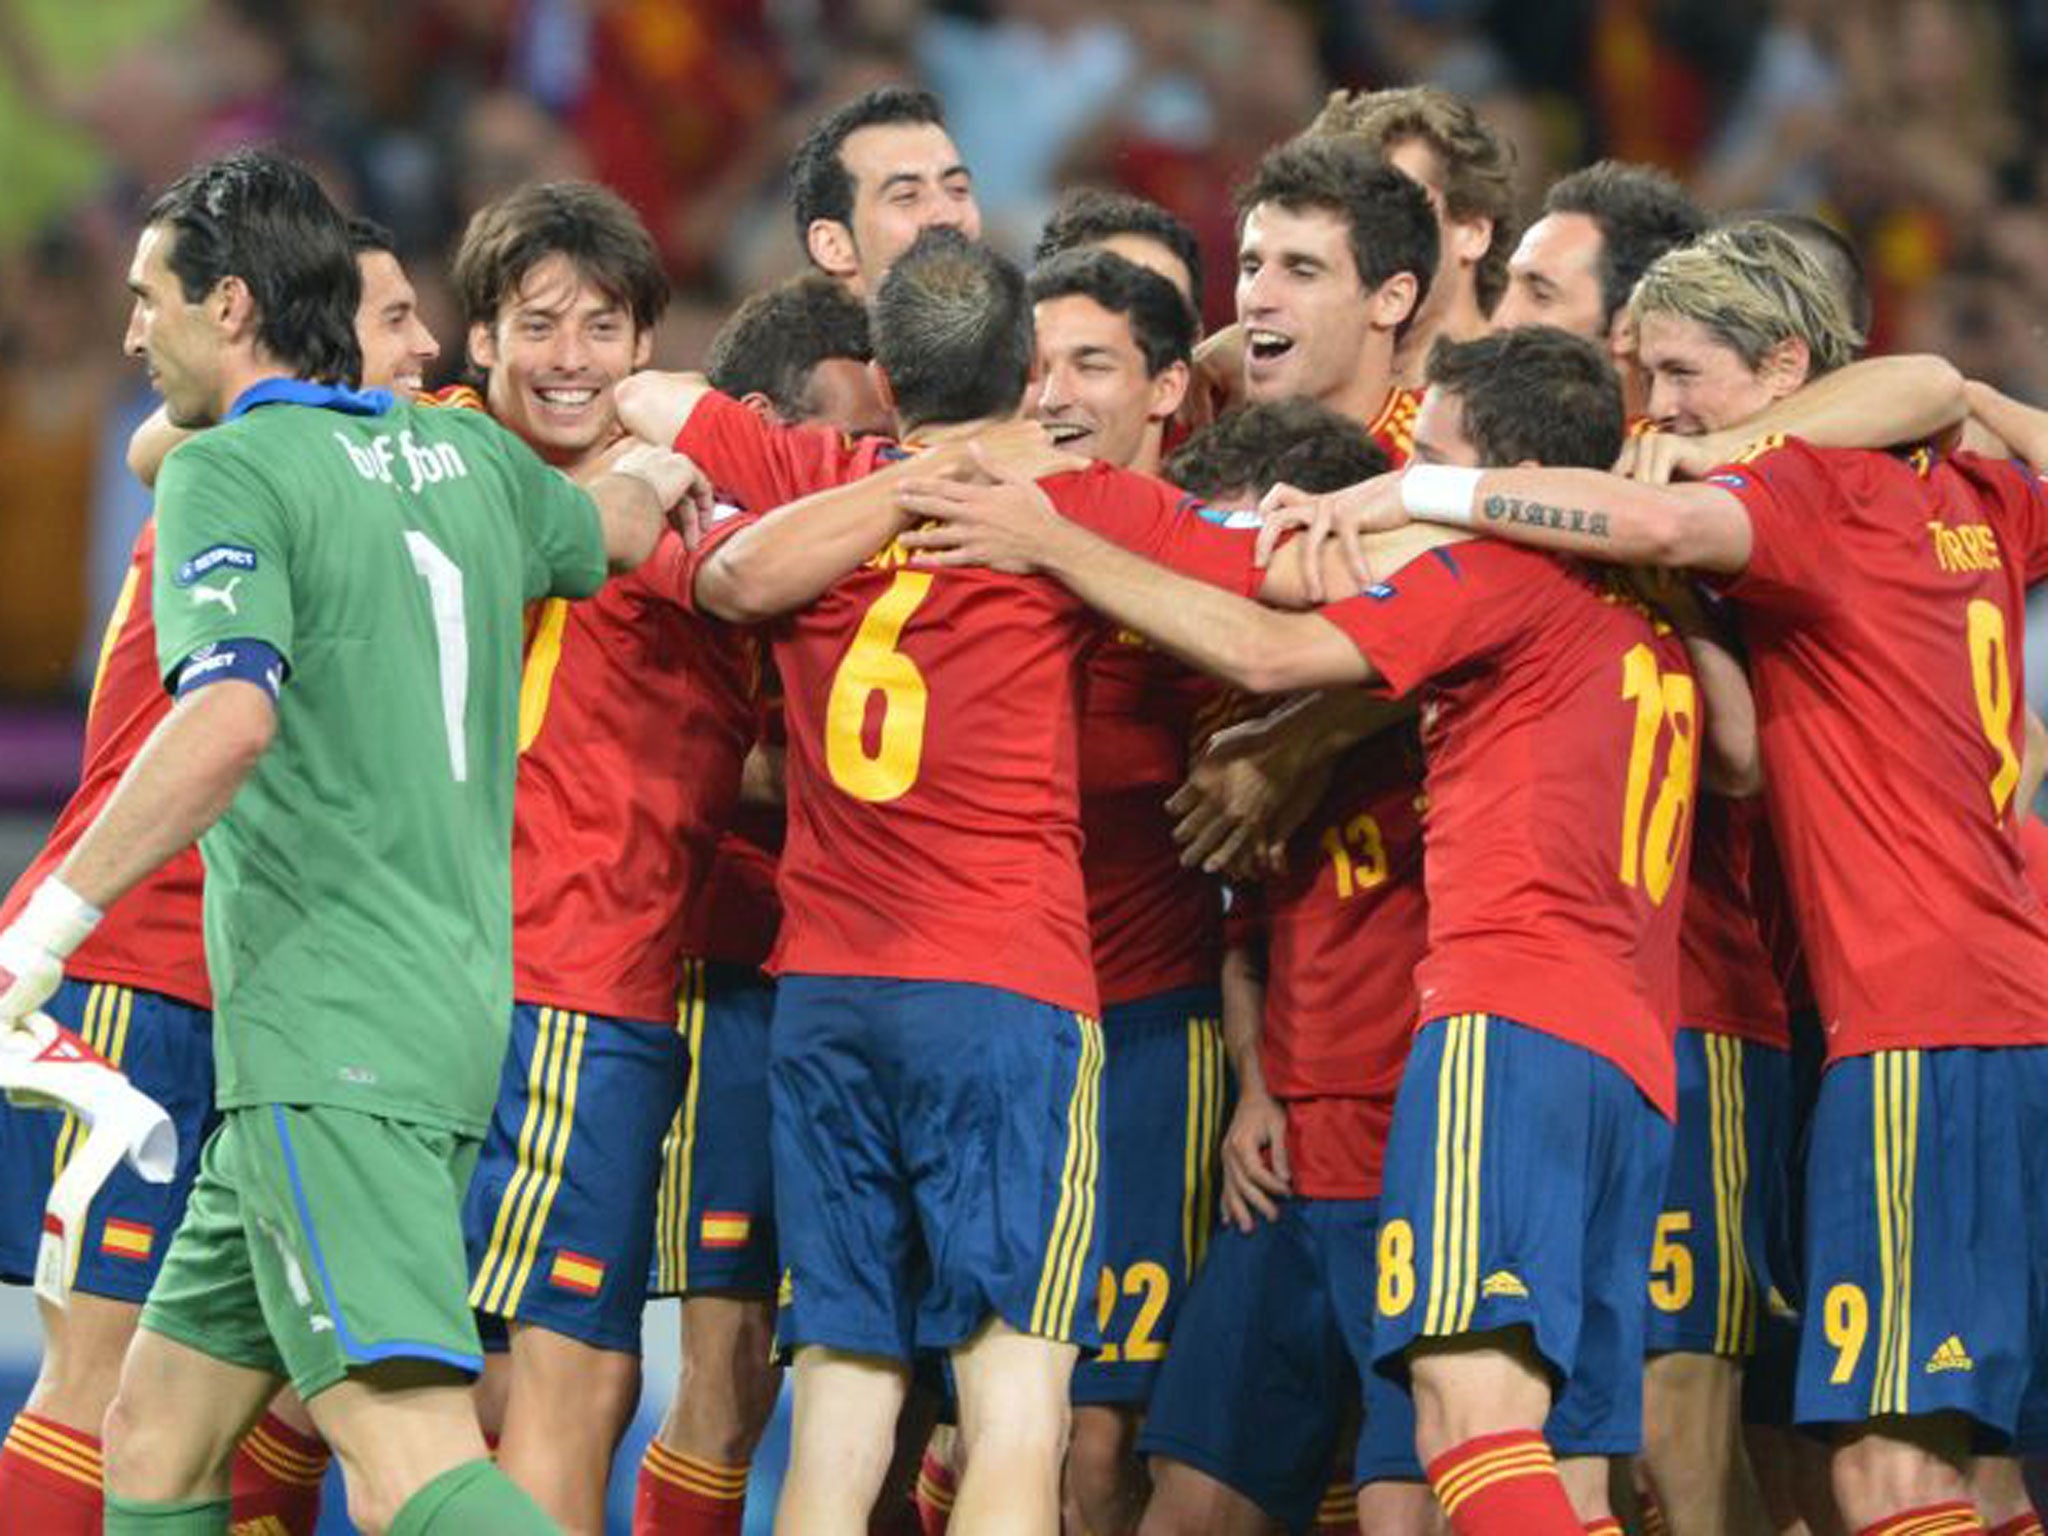 The Spain players after their 4-0 win over Italy in the European Championship final in Kiev in July